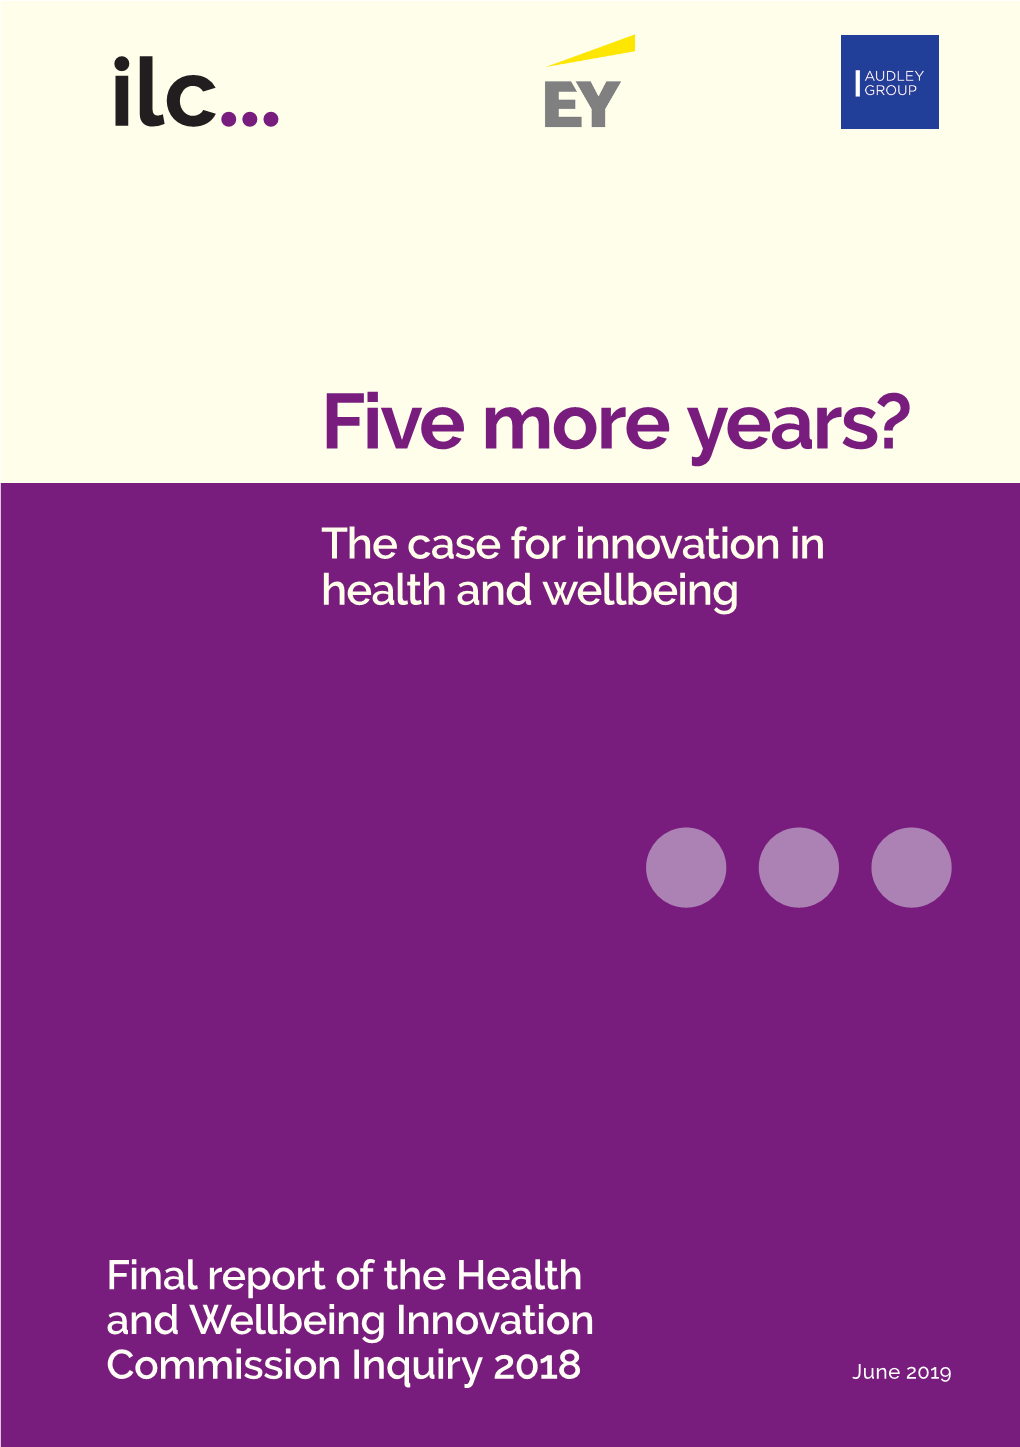 Five More Years? the Case for Innovation in Health and Wellbeing